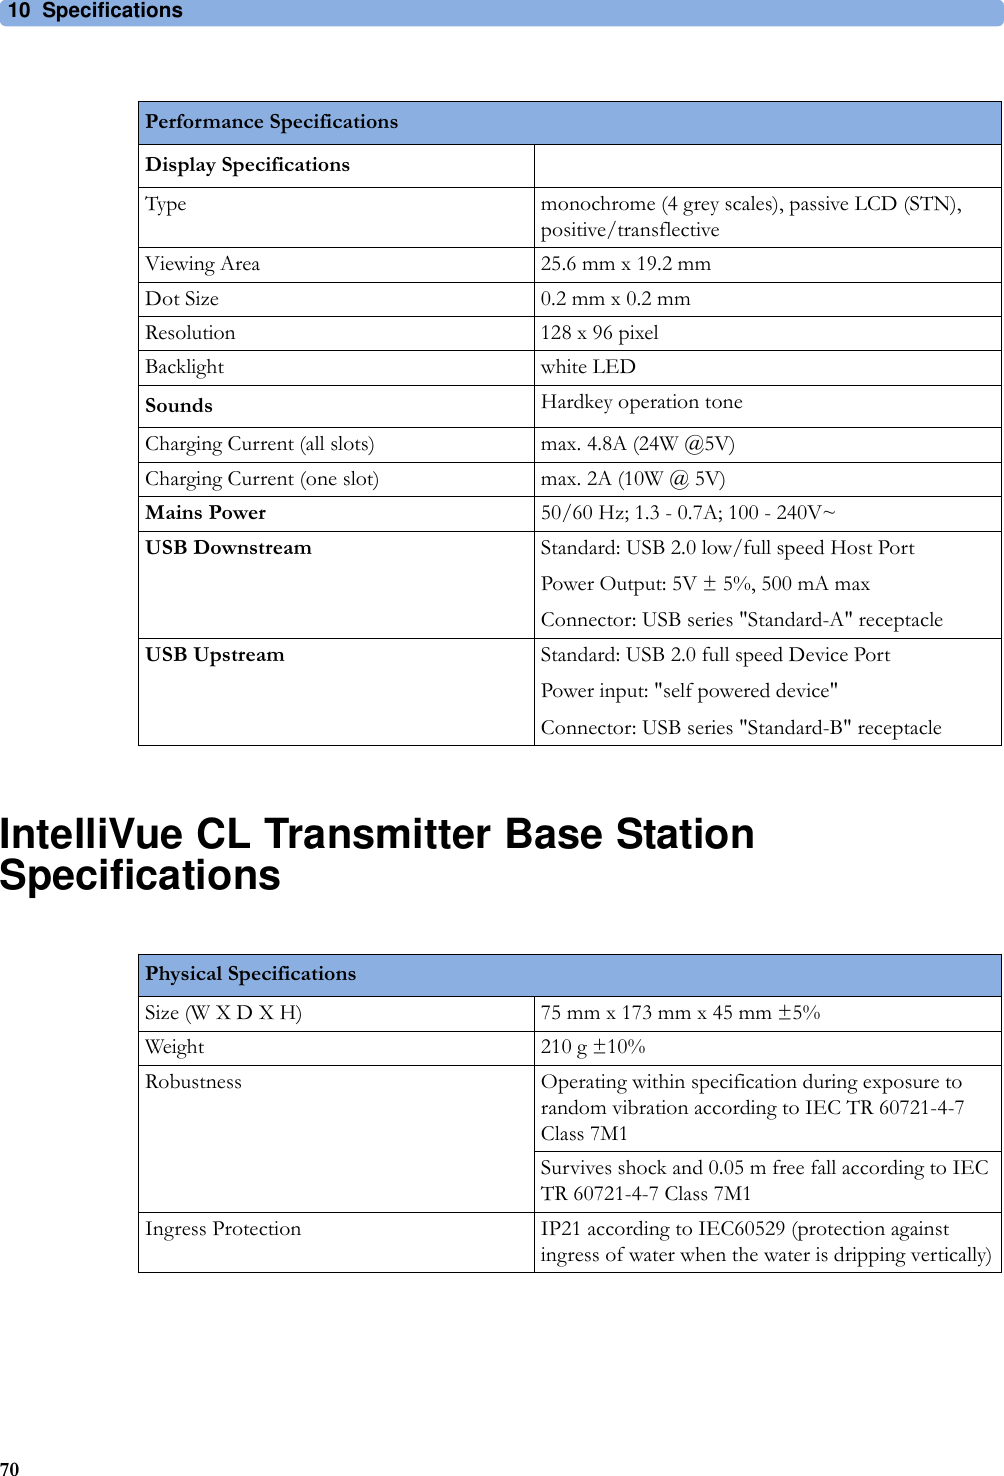 10 Specifications70IntelliVue CL Transmitter Base Station SpecificationsPerformance SpecificationsDisplay SpecificationsType monochrome (4 grey scales), passive LCD (STN), positive/transflectiveViewing Area 25.6 mm x 19.2 mmDot Size 0.2 mm x 0.2 mmResolution 128 x 96 pixelBacklight white LEDSounds Hardkey operation toneCharging Current (all slots) max. 4.8A (24W @5V)Charging Current (one slot) max. 2A (10W @ 5V)Mains Power 50/60 Hz; 1.3 - 0.7A; 100 - 240V~USB Downstream Standard: USB 2.0 low/full speed Host PortPower Output: 5V ± 5%, 500 mA maxConnector: USB series &quot;Standard-A&quot; receptacleUSB Upstream Standard: USB 2.0 full speed Device PortPower input: &quot;self powered device&quot;Connector: USB series &quot;Standard-B&quot; receptaclePhysical SpecificationsSize (W X D X H) 75 mm x 173 mm x 45 mm ±5%Weight 210 g ±10%Robustness Operating within specification during exposure to random vibration according to IEC TR 60721-4-7 Class 7M1Survives shock and 0.05 m free fall according to IEC TR 60721-4-7 Class 7M1Ingress Protection IP21 according to IEC60529 (protection against ingress of water when the water is dripping vertically)